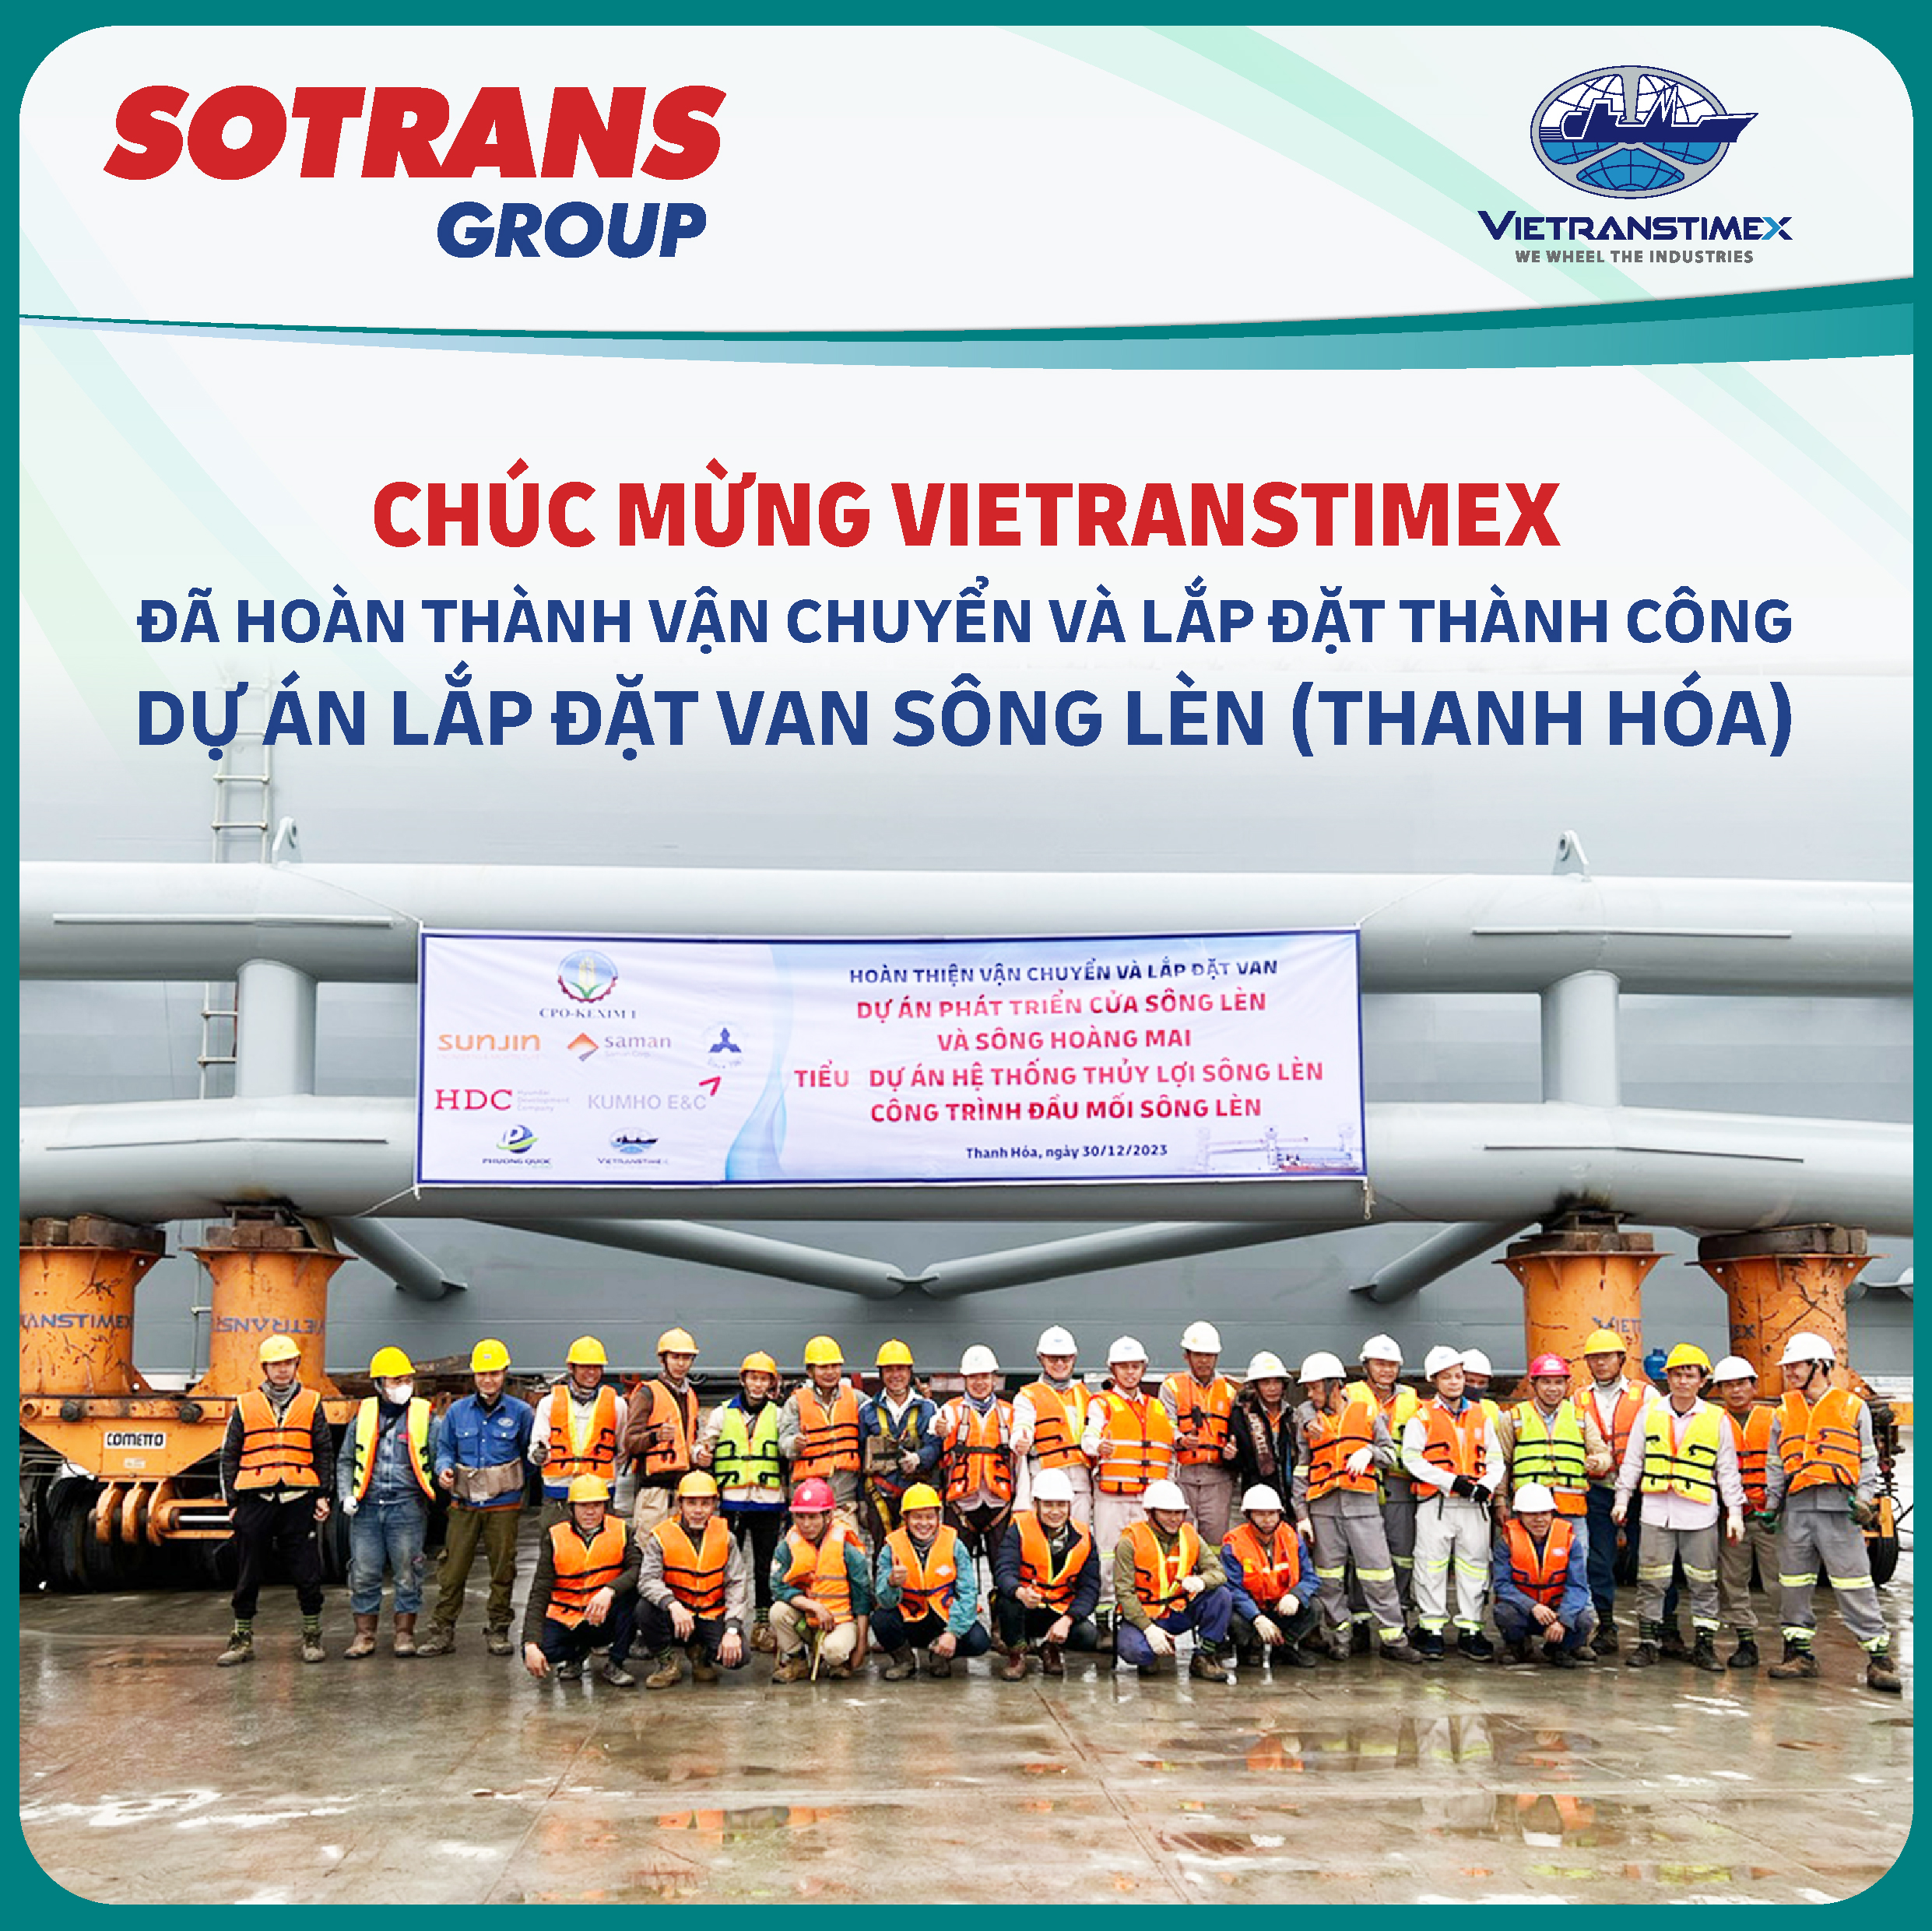 Vietranstimex Completes The Transportation And Erection Of Valve Gate For Len River (Thanh Hoa Province)